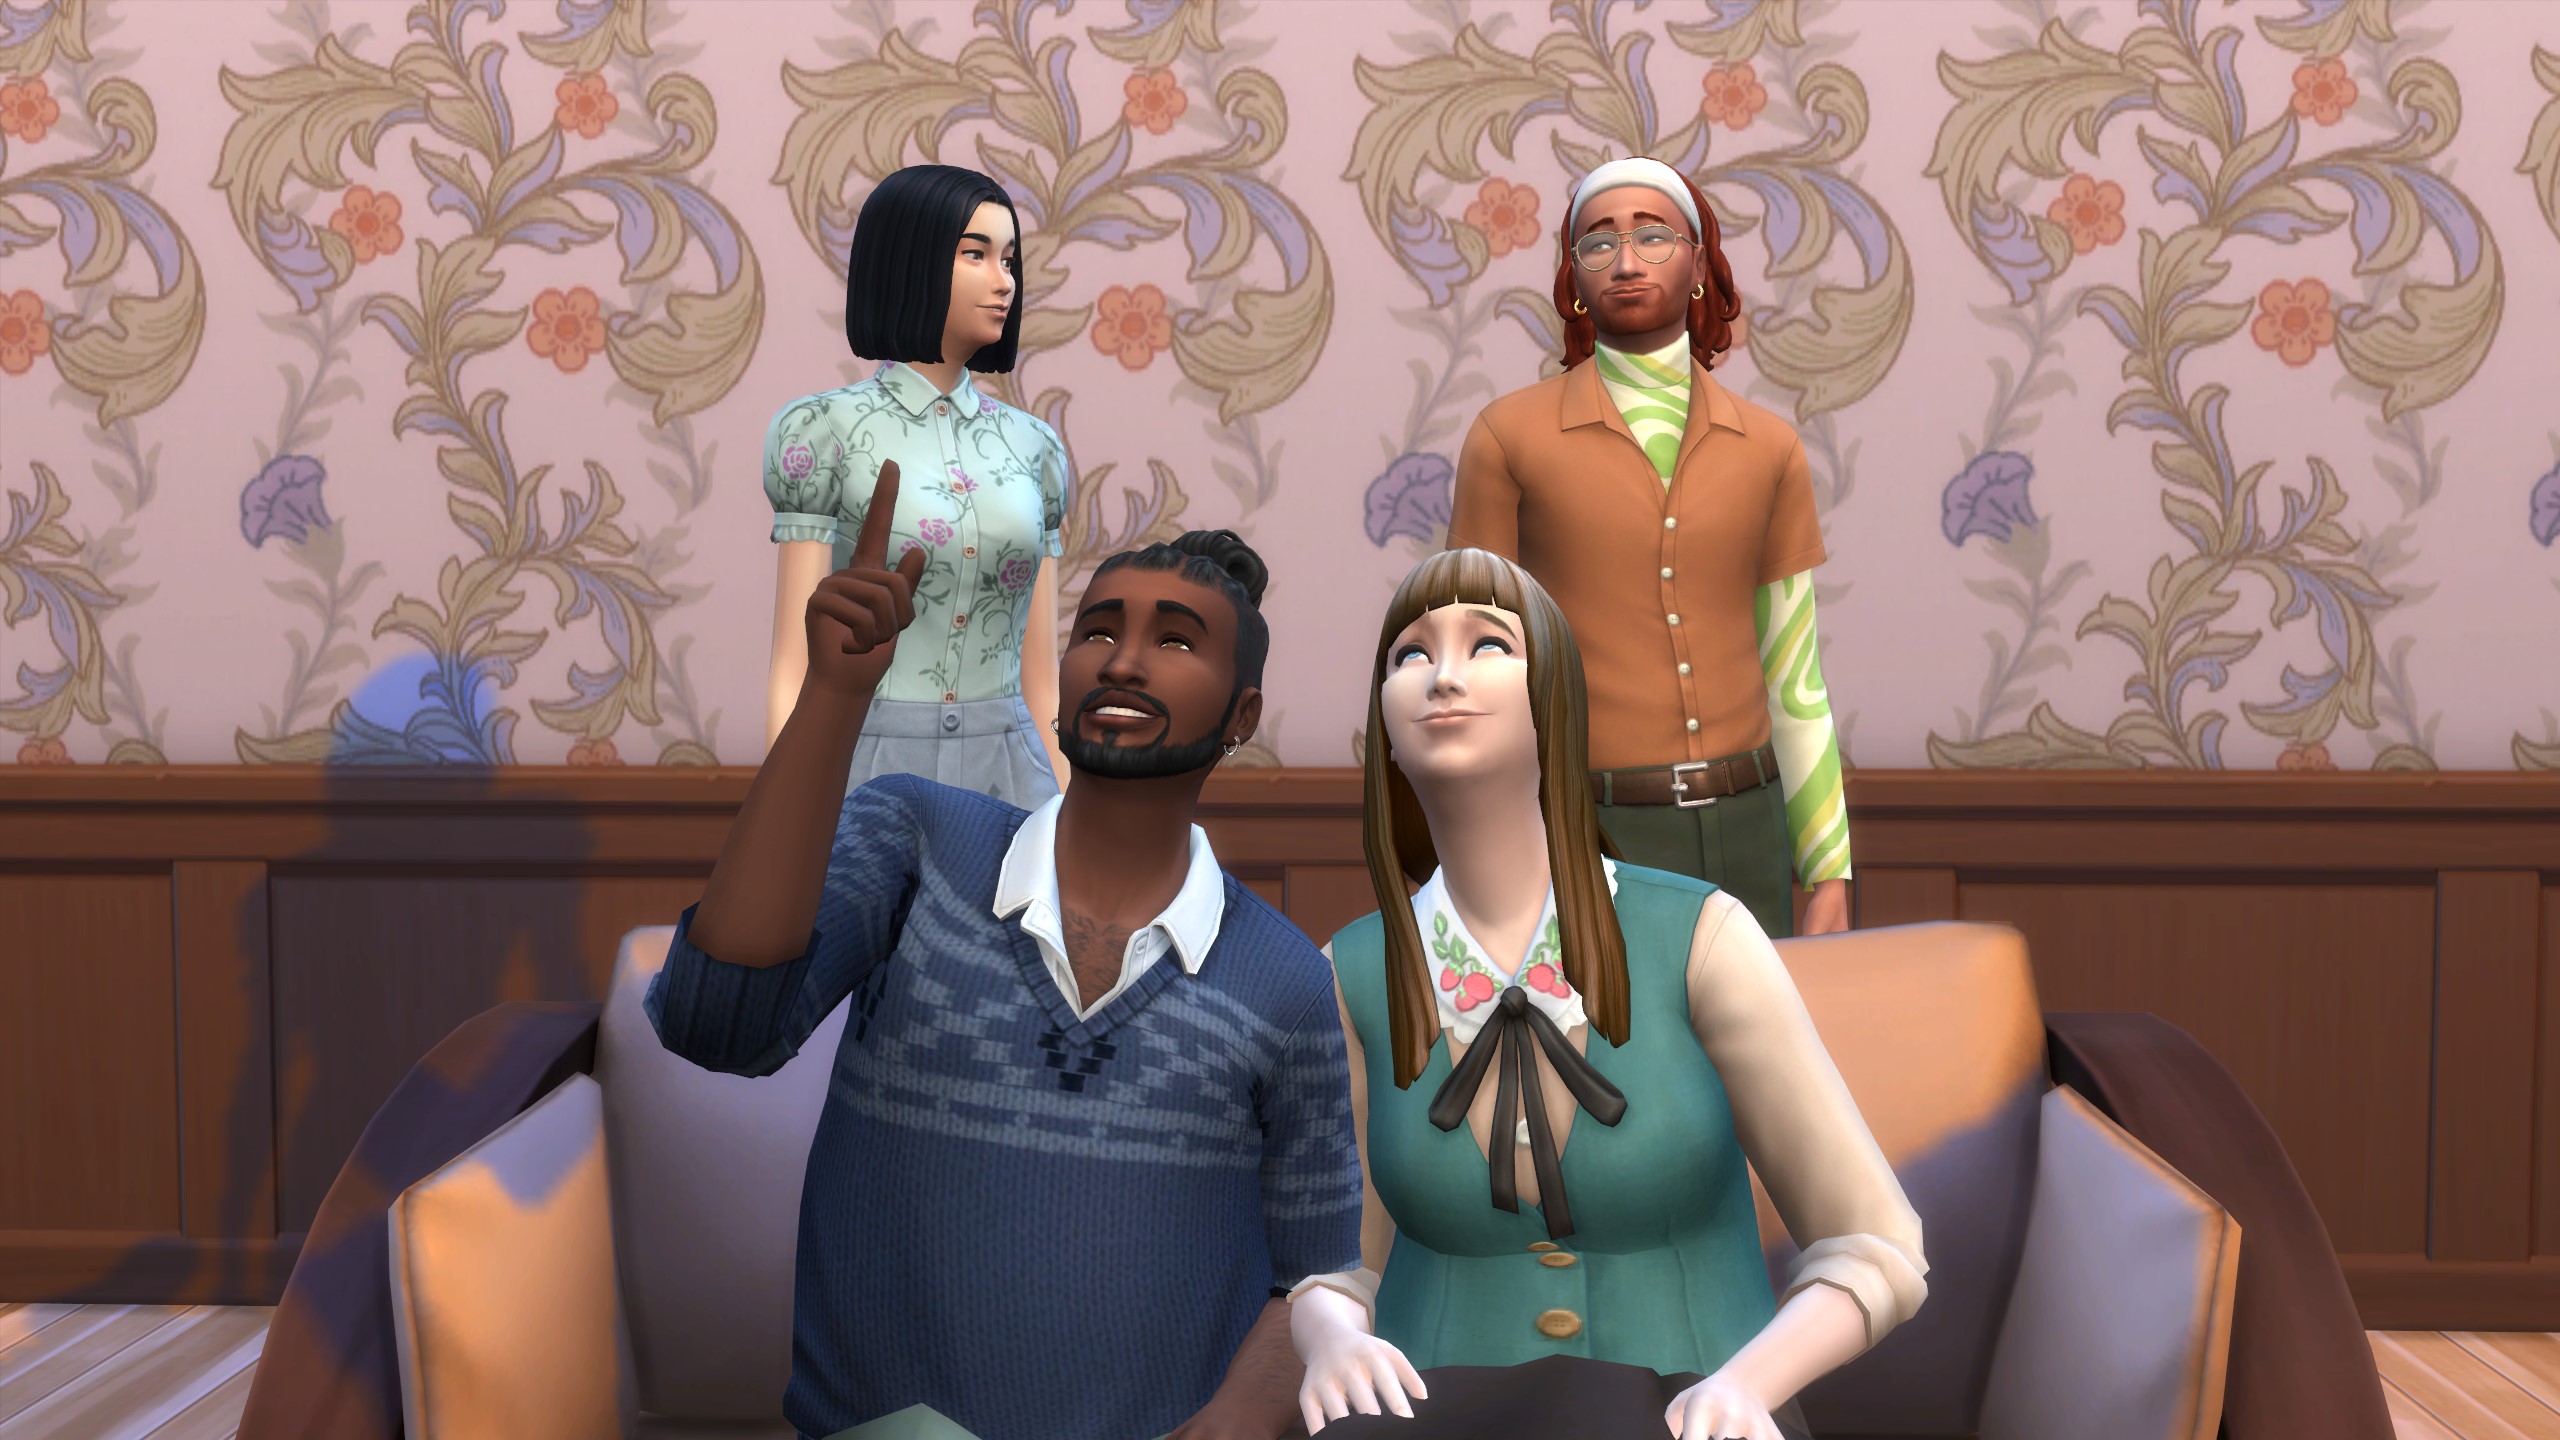 The Sims 4 - Two Sims sit close together on the couch while two others stand behind as friends.